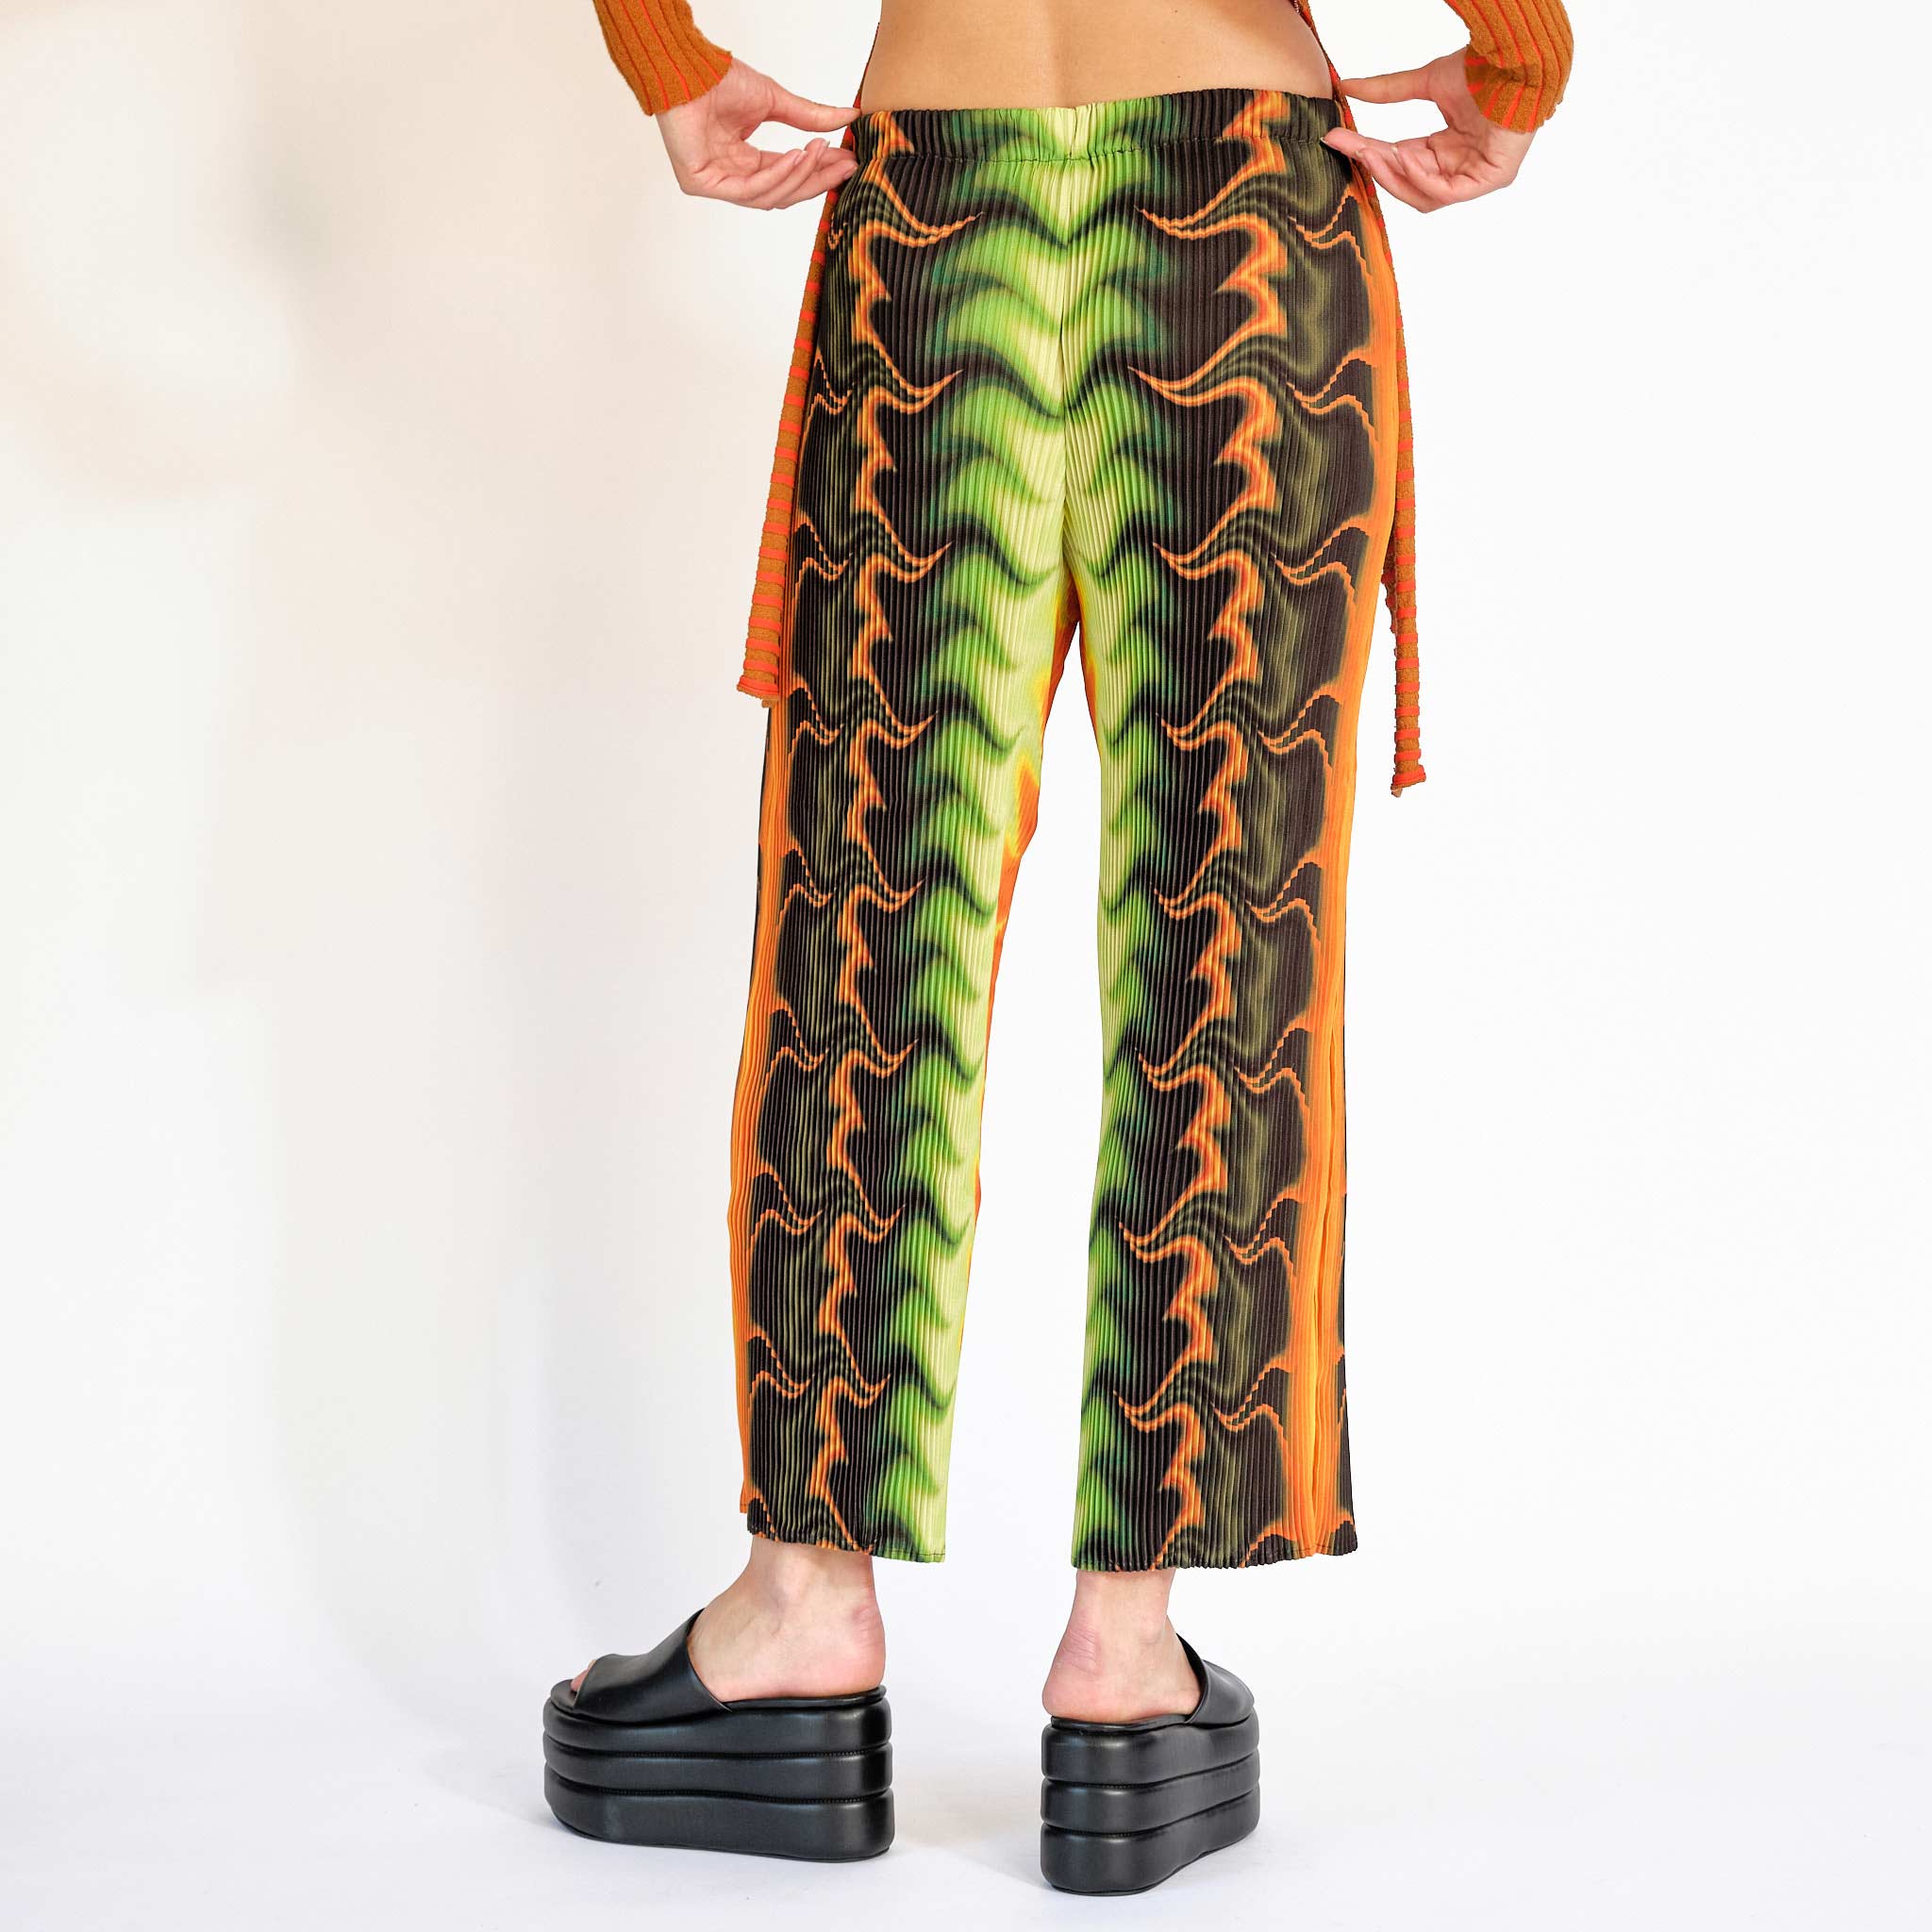 A model wears the green orange and black graphic printed pleated pant - back view.